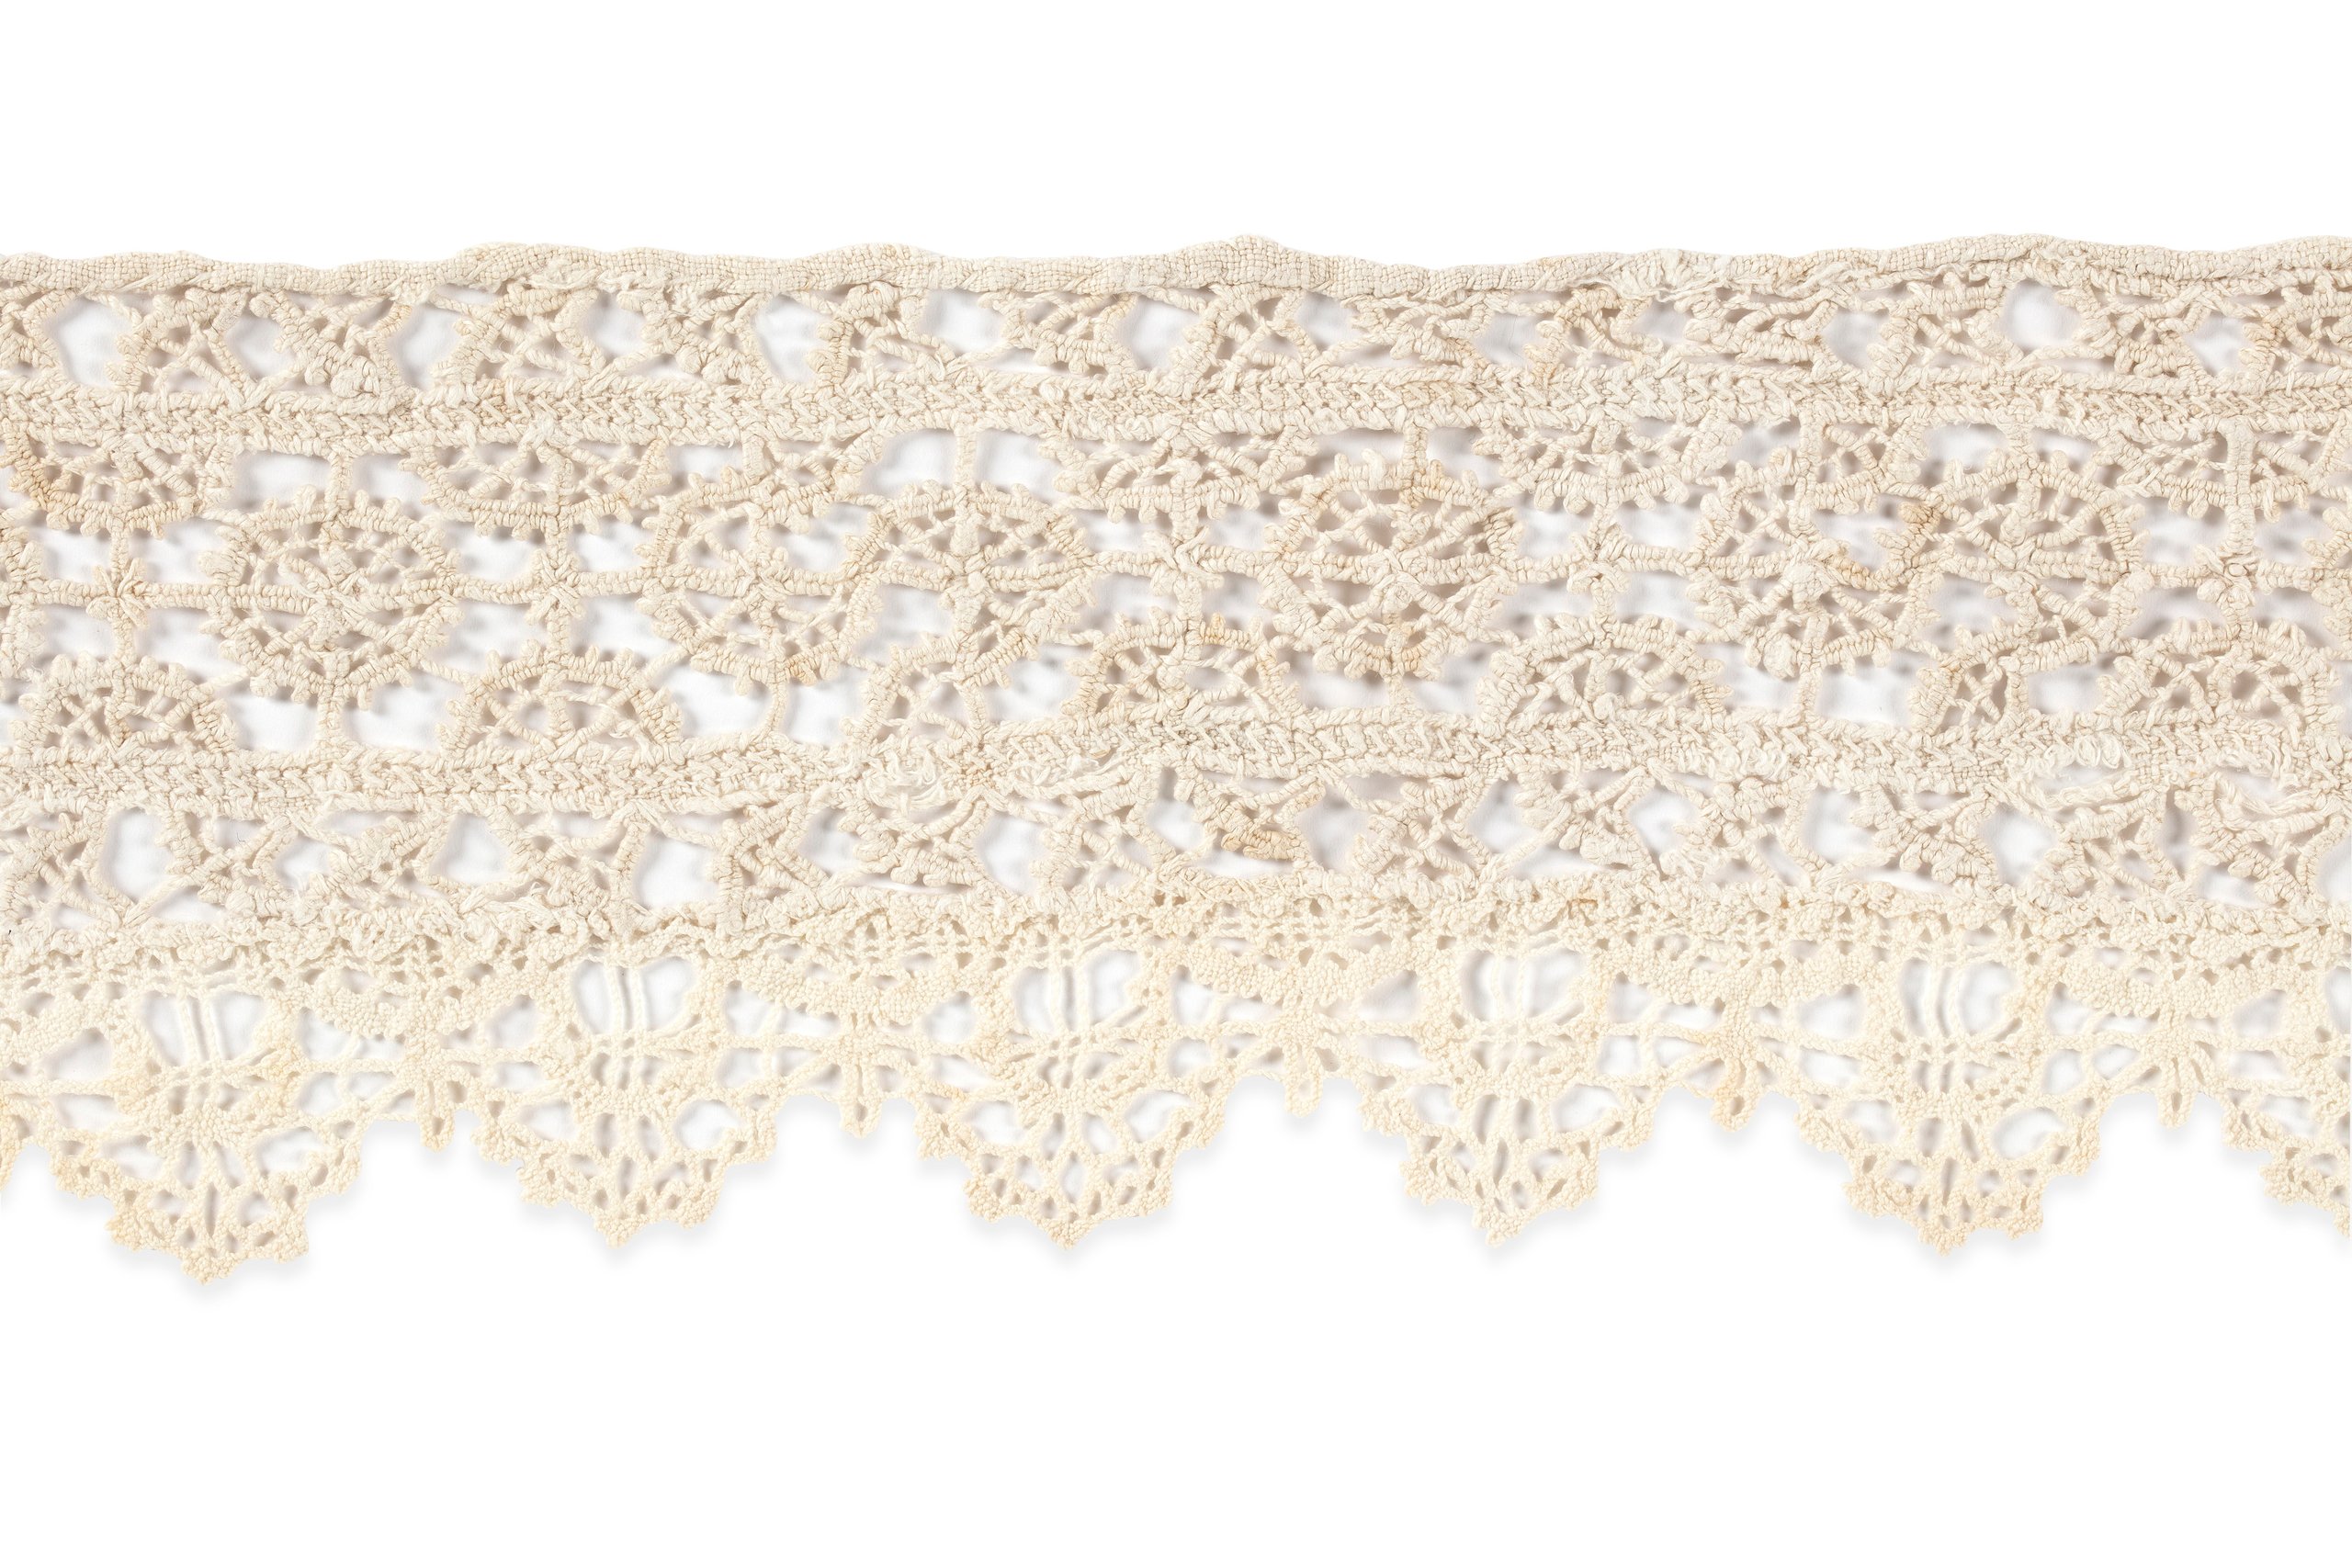 Lace border band made in Italy